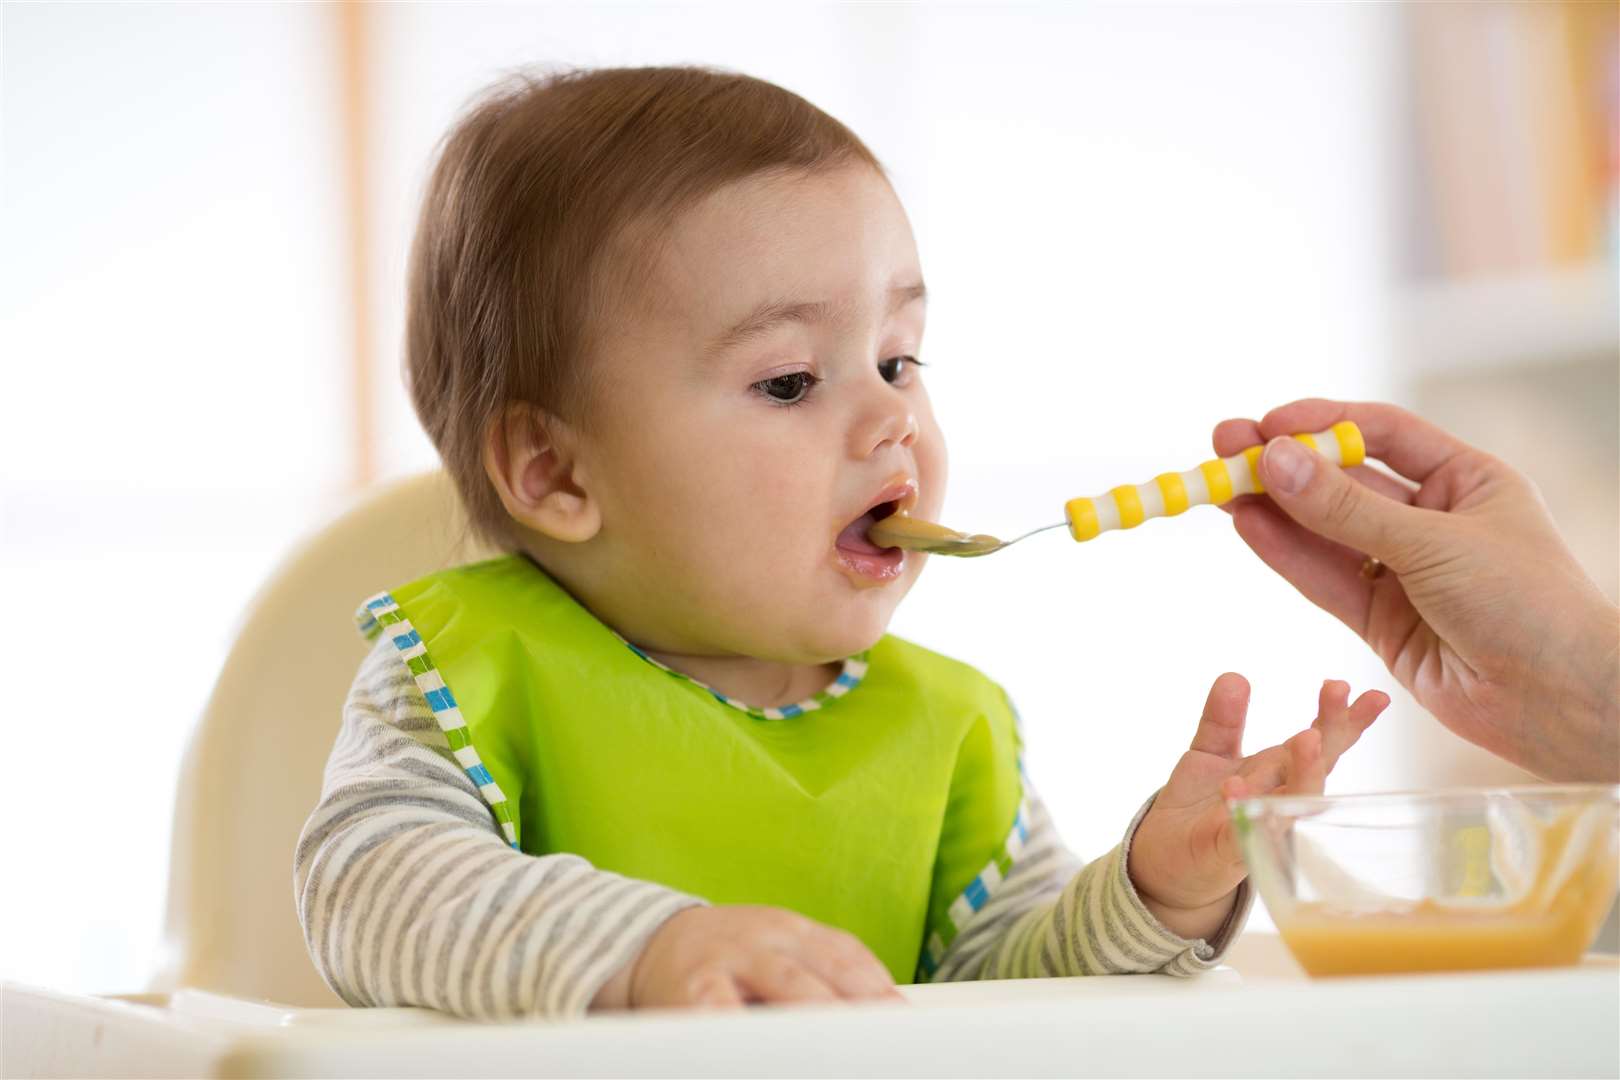 The study suggested that feeding babies a diet rich in fish and vegetables, and avoiding too many sugary drinks, could cut the risk of developing bowel disorders in later life by a quarter (Alamy/PA)